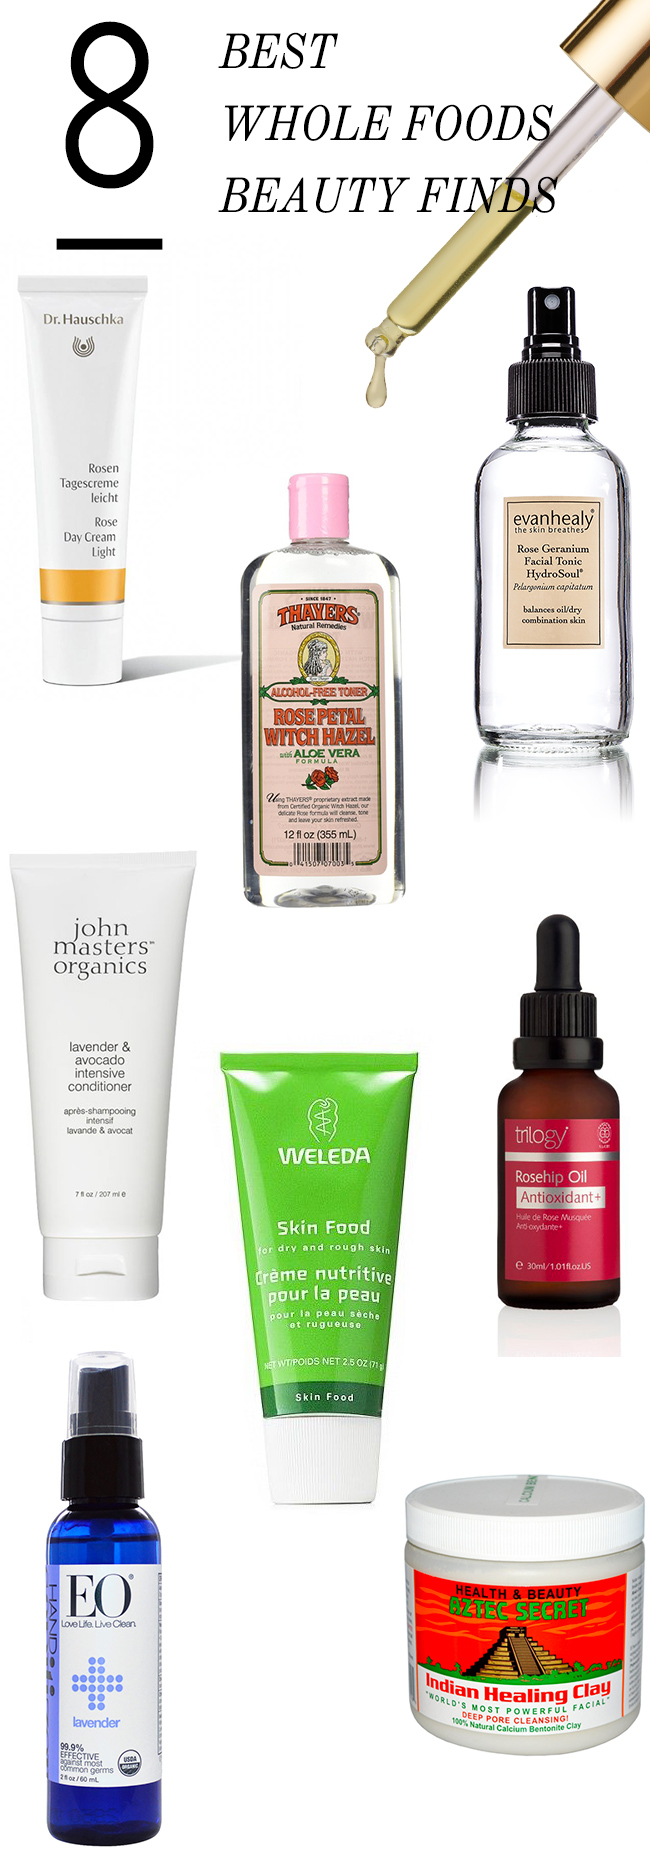 8-BEST-WHOLE-FOODS-BEAUTY-FINDS